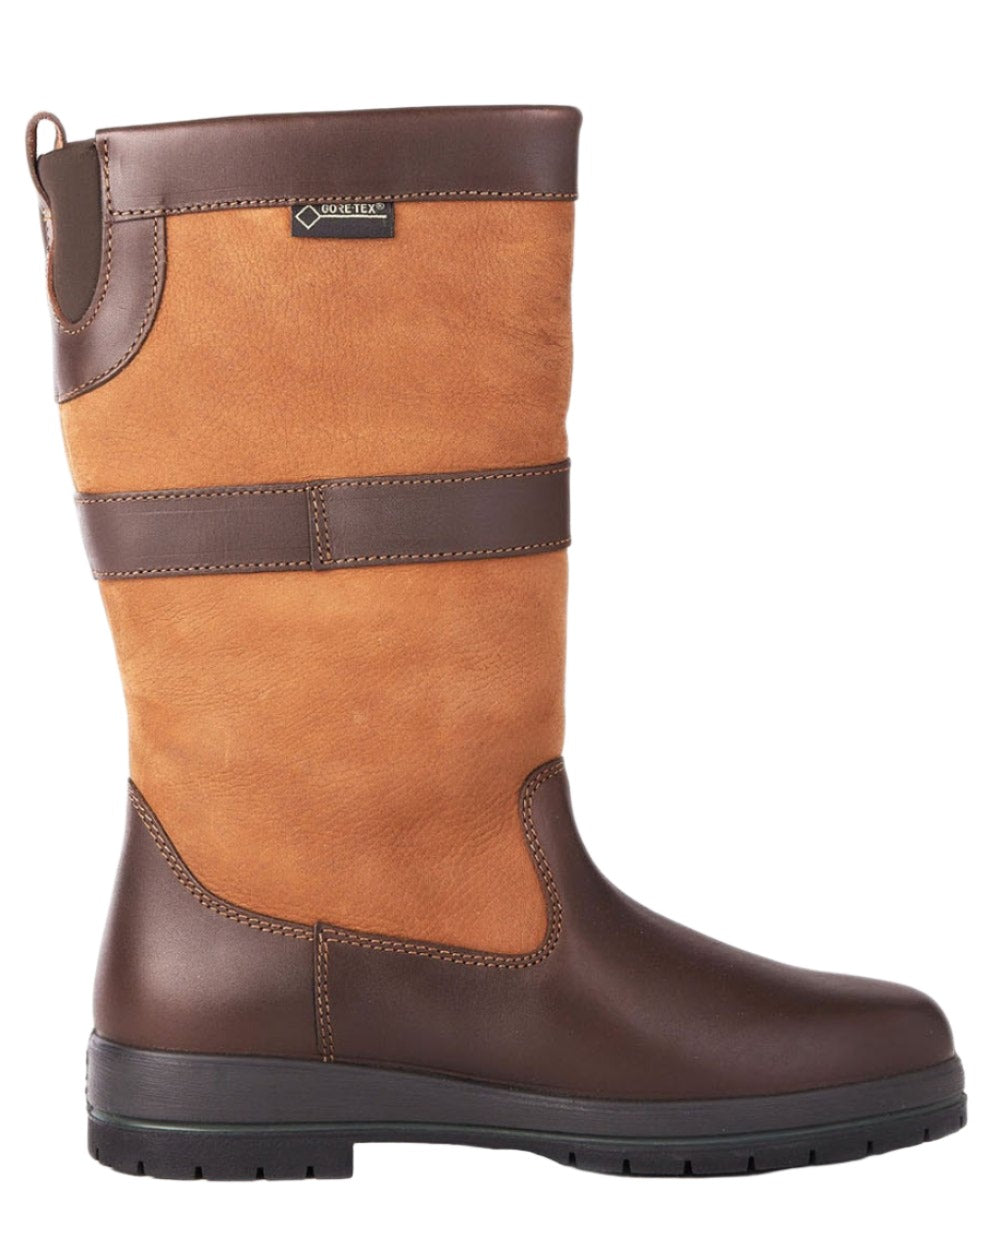 Brown coloured Dubarry Kildare Country Boots on white background 